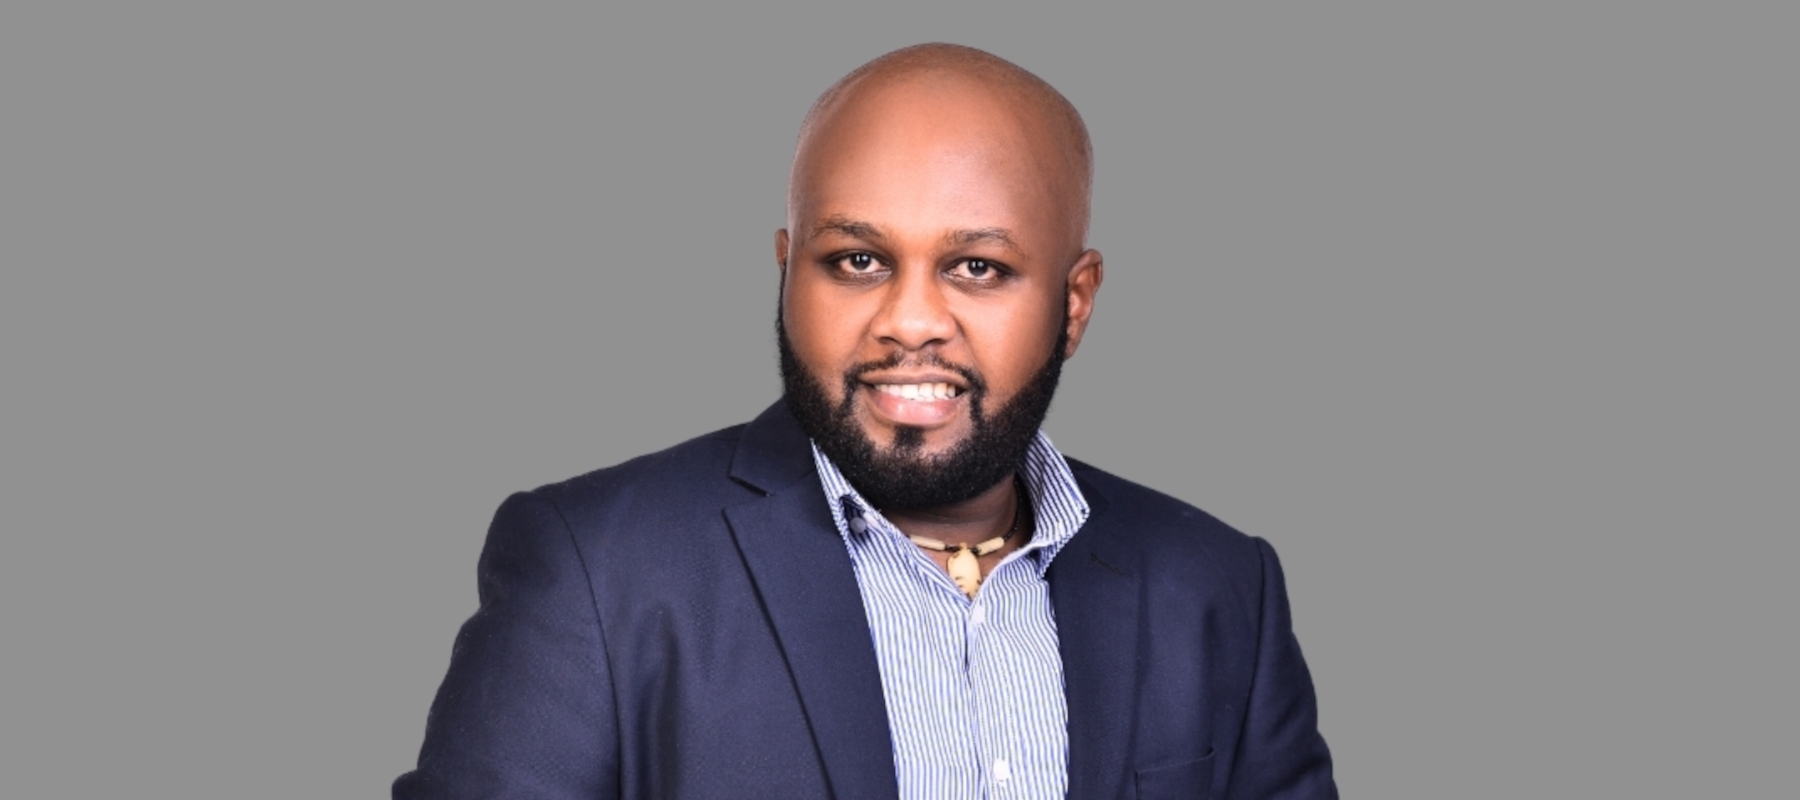 [Marketing Week] Bob Koigi: Embracing artificial intelligence for brand solutions and growth